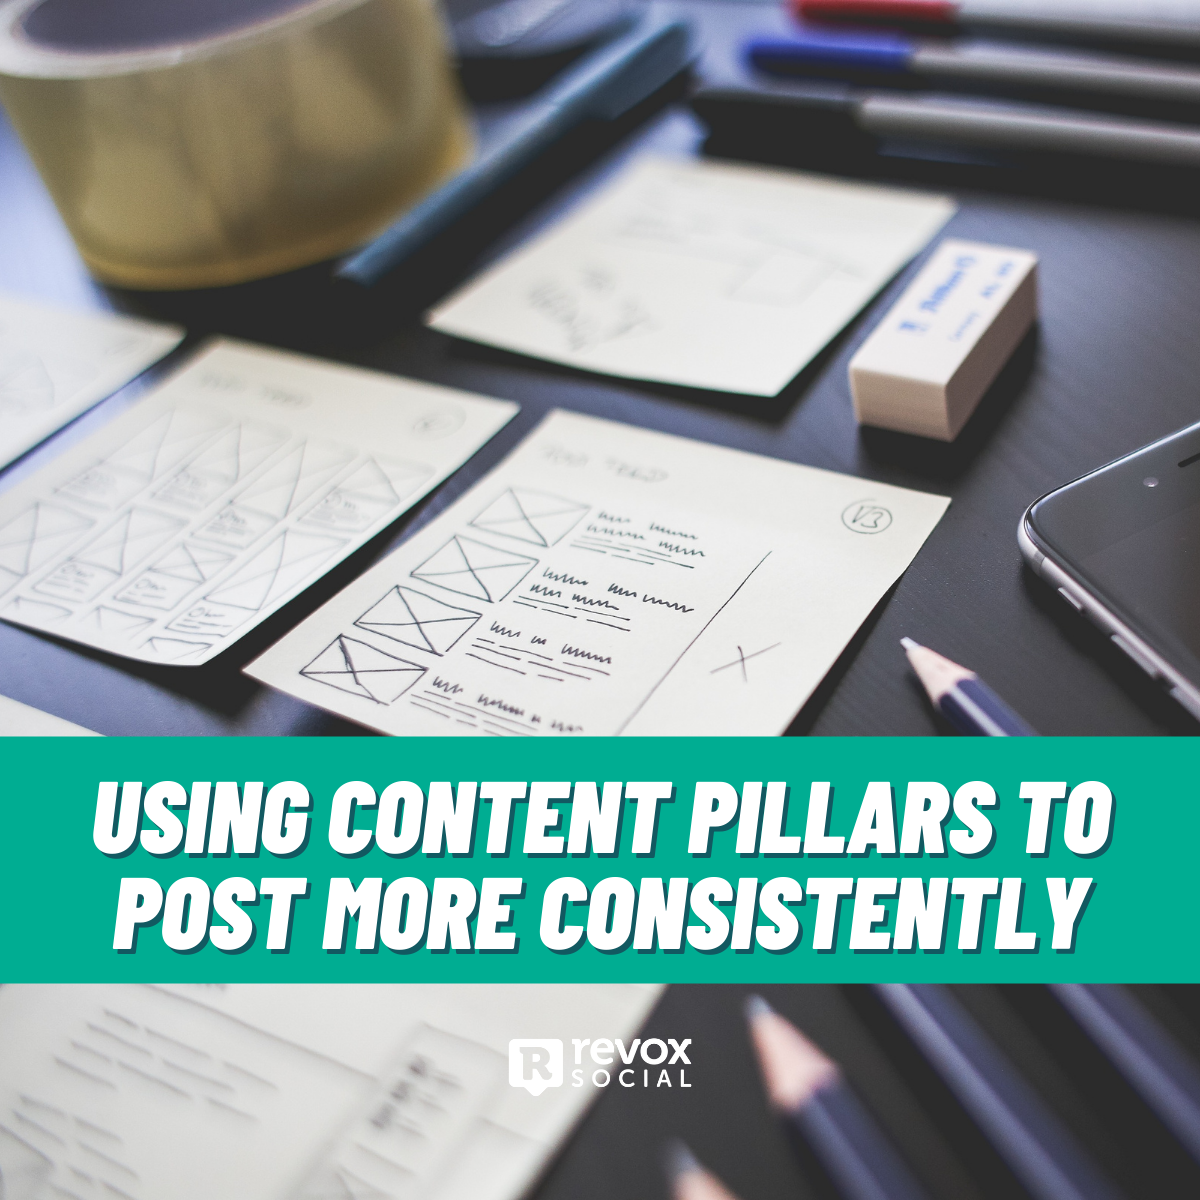 Content Pillars for Posting Consistently - A Free Resource from Revox Social